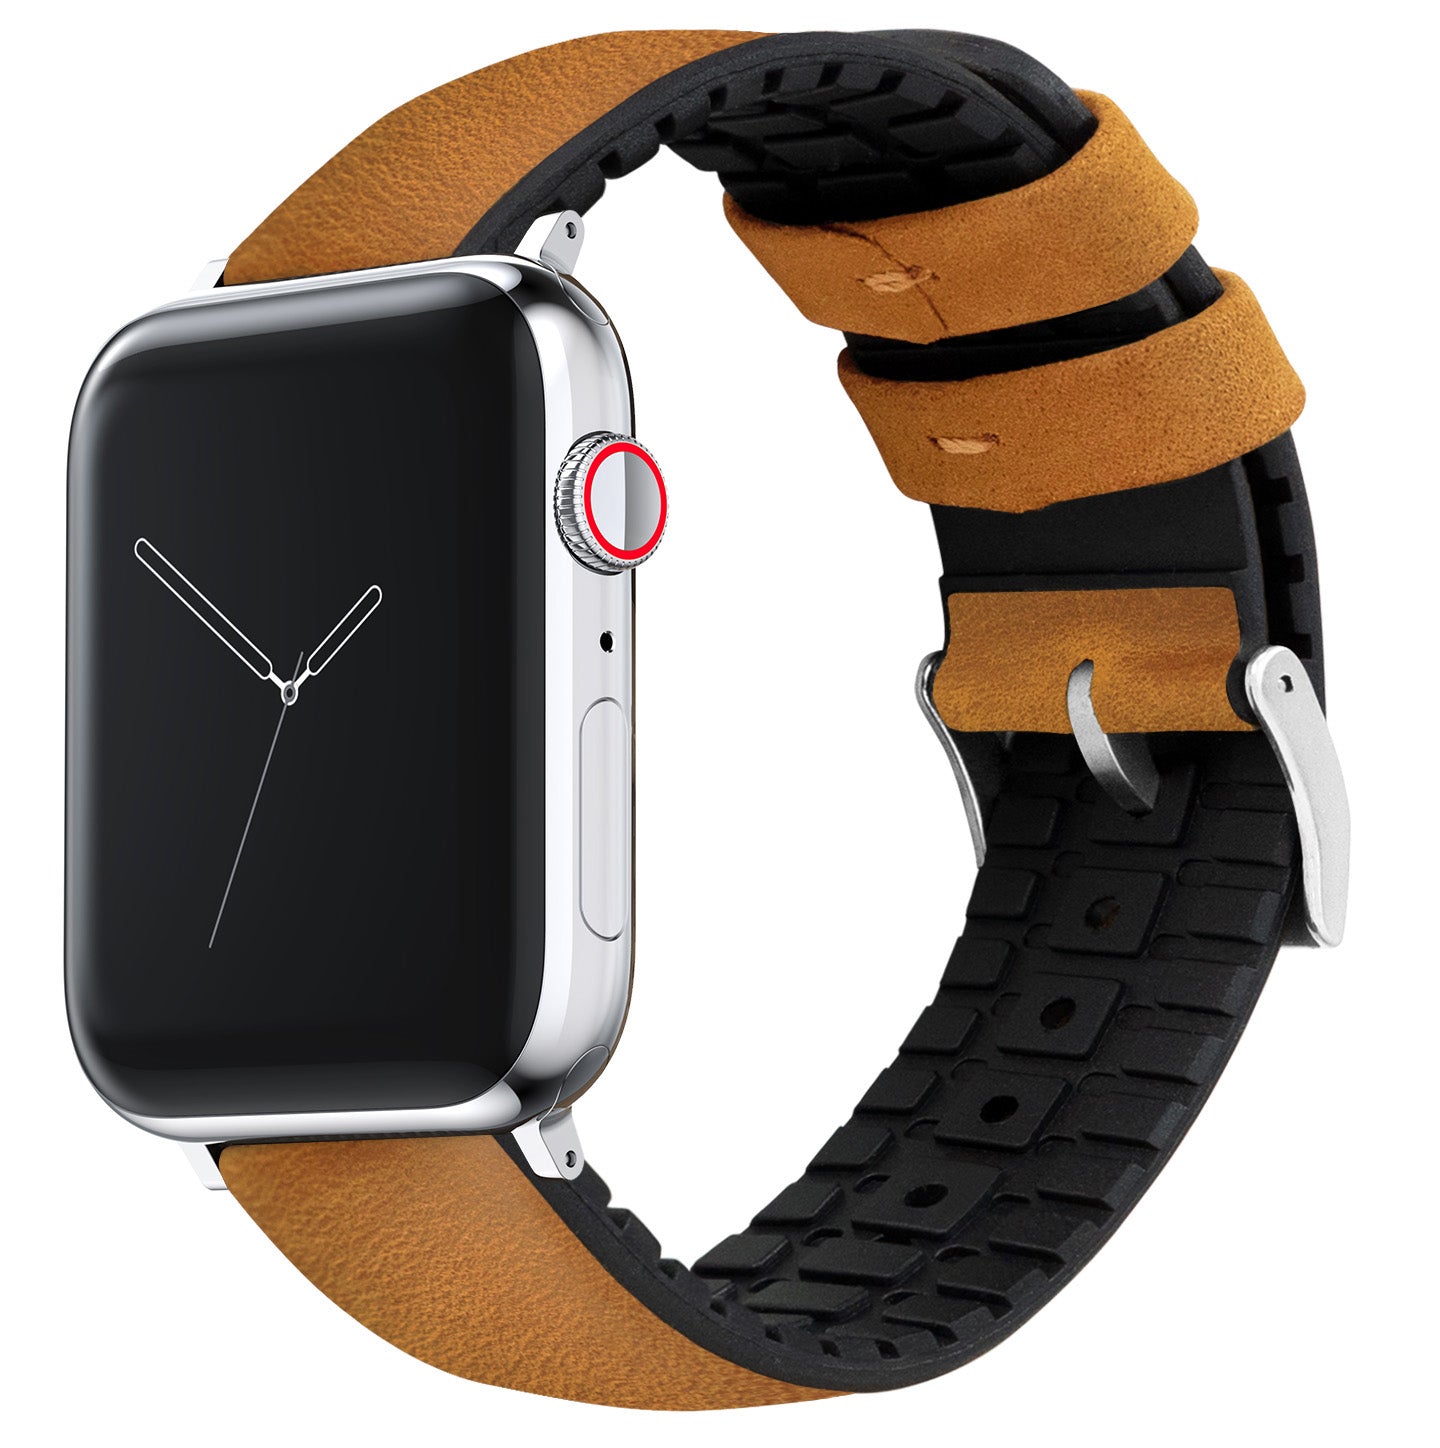 Apple Watch | Cedar Brown Leather and Rubber Hybrid - Barton Watch Bands